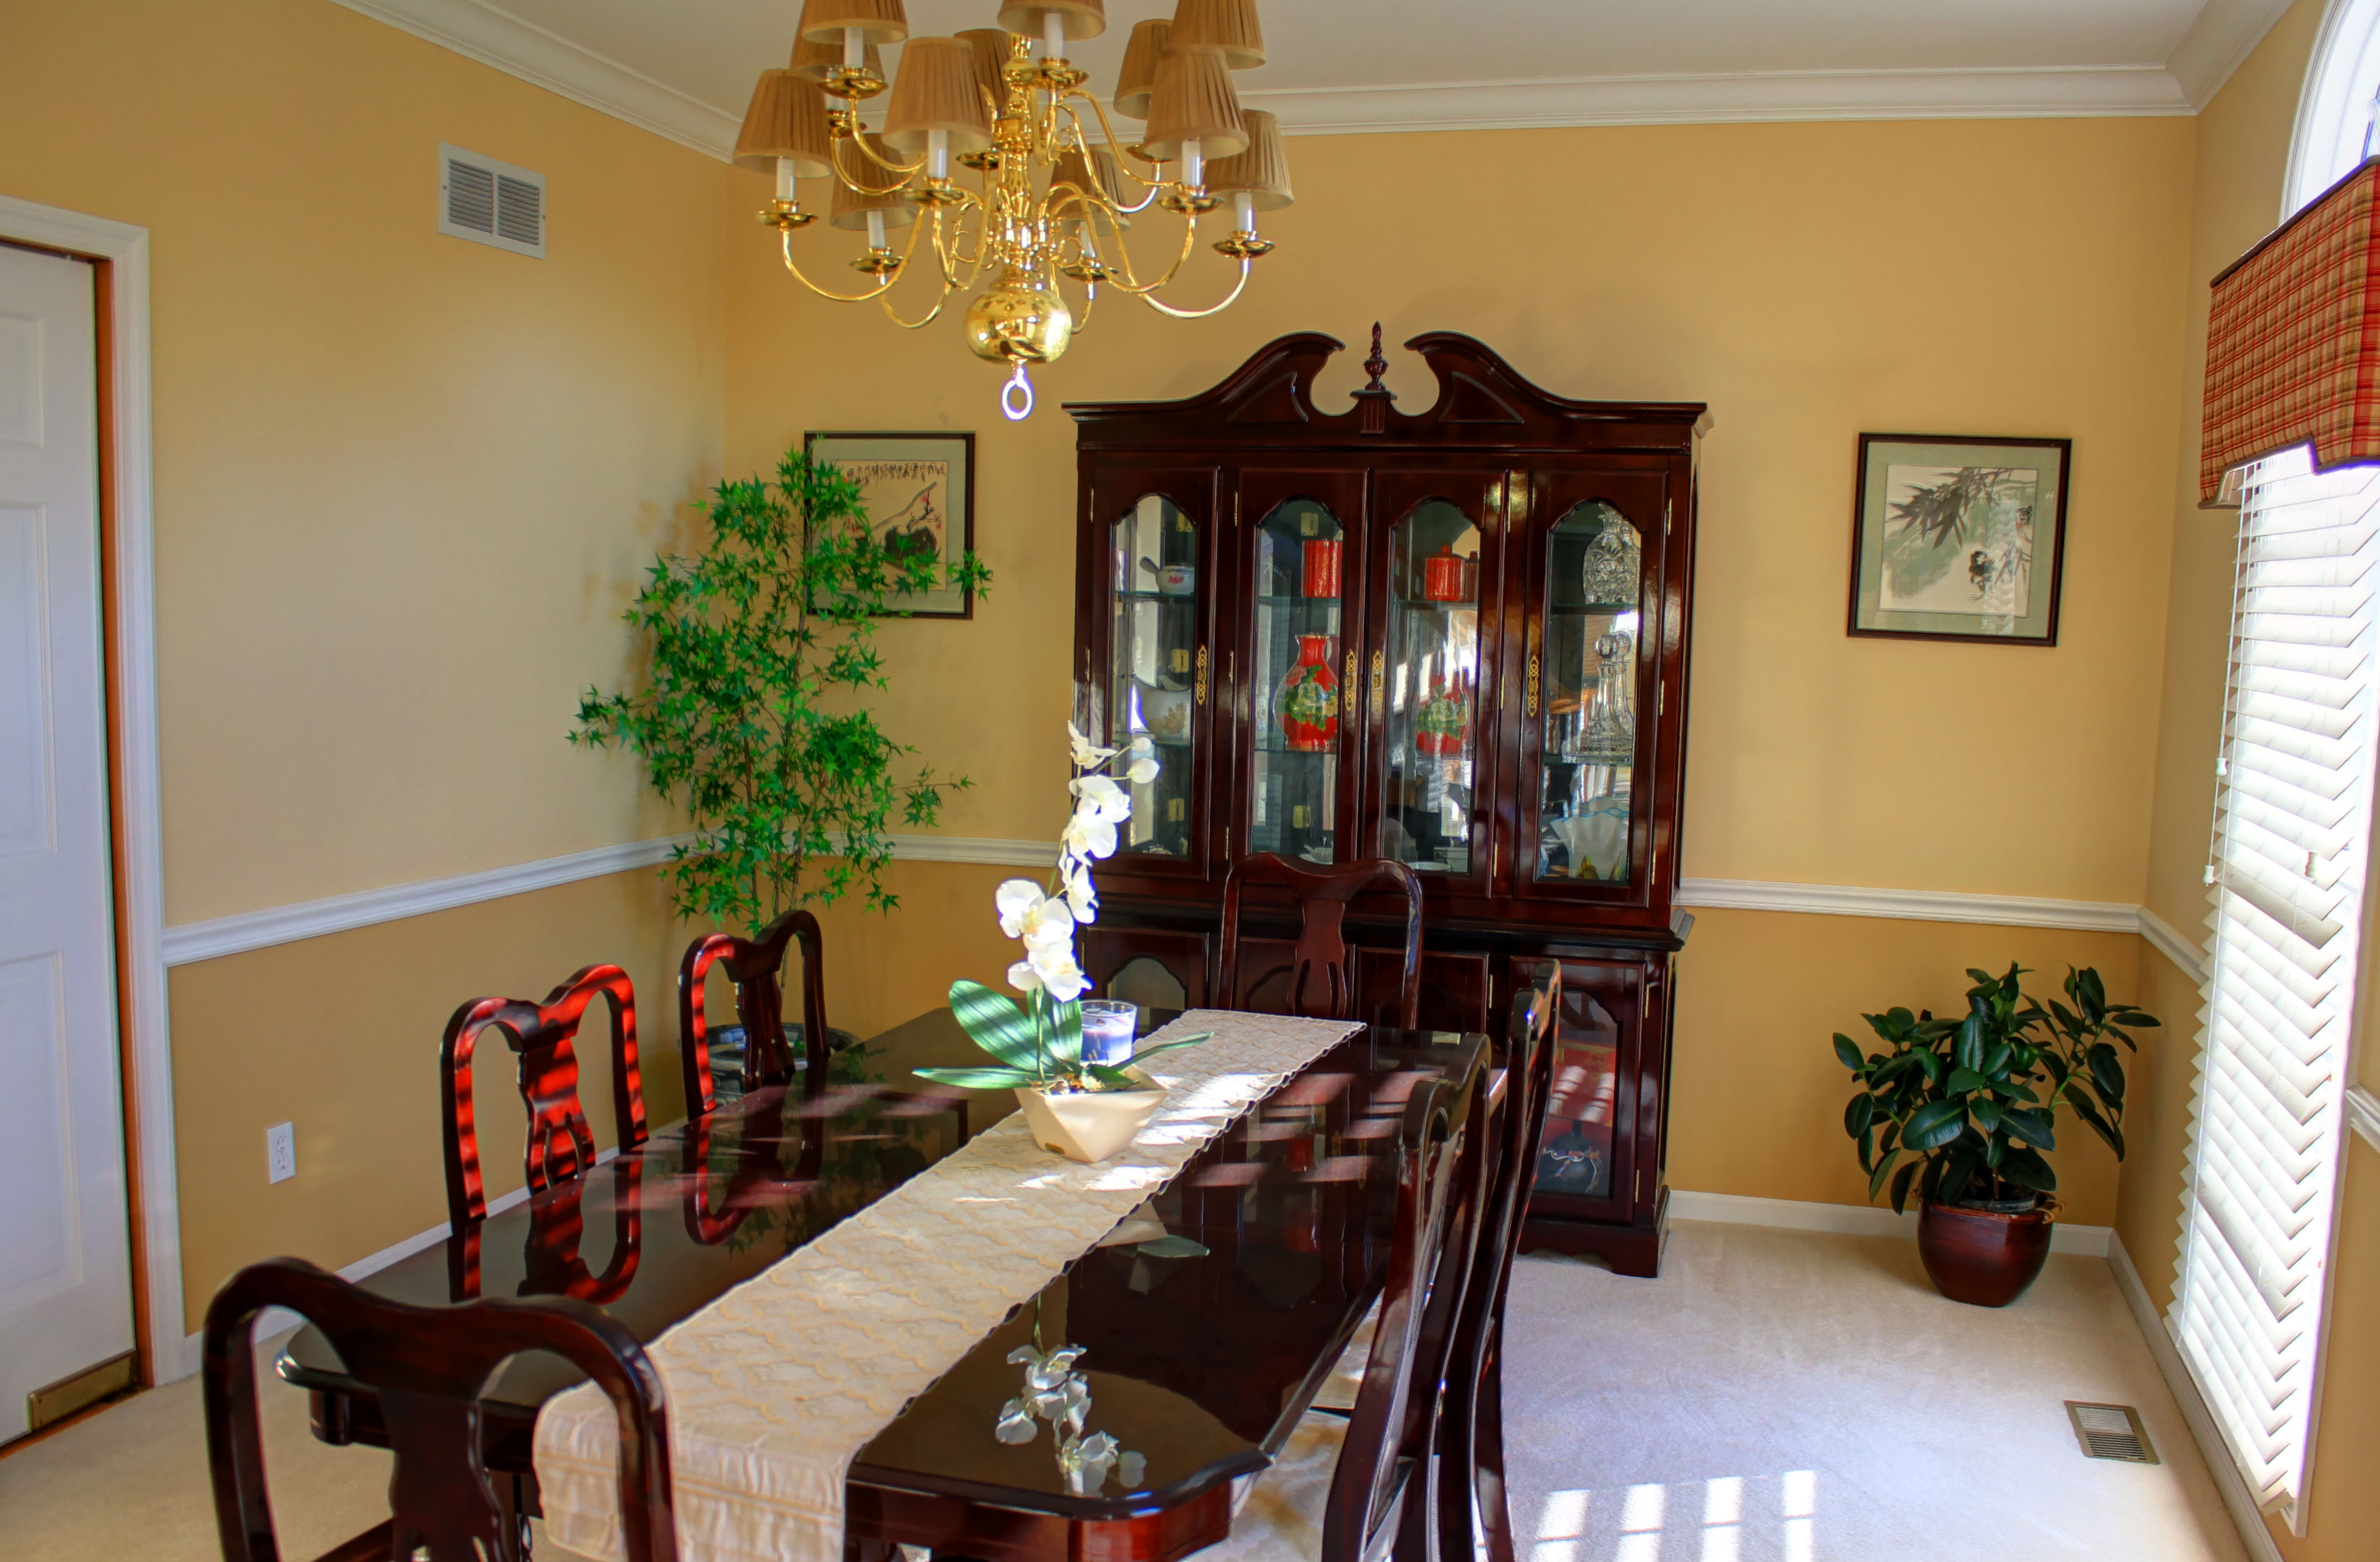 dining room set from above